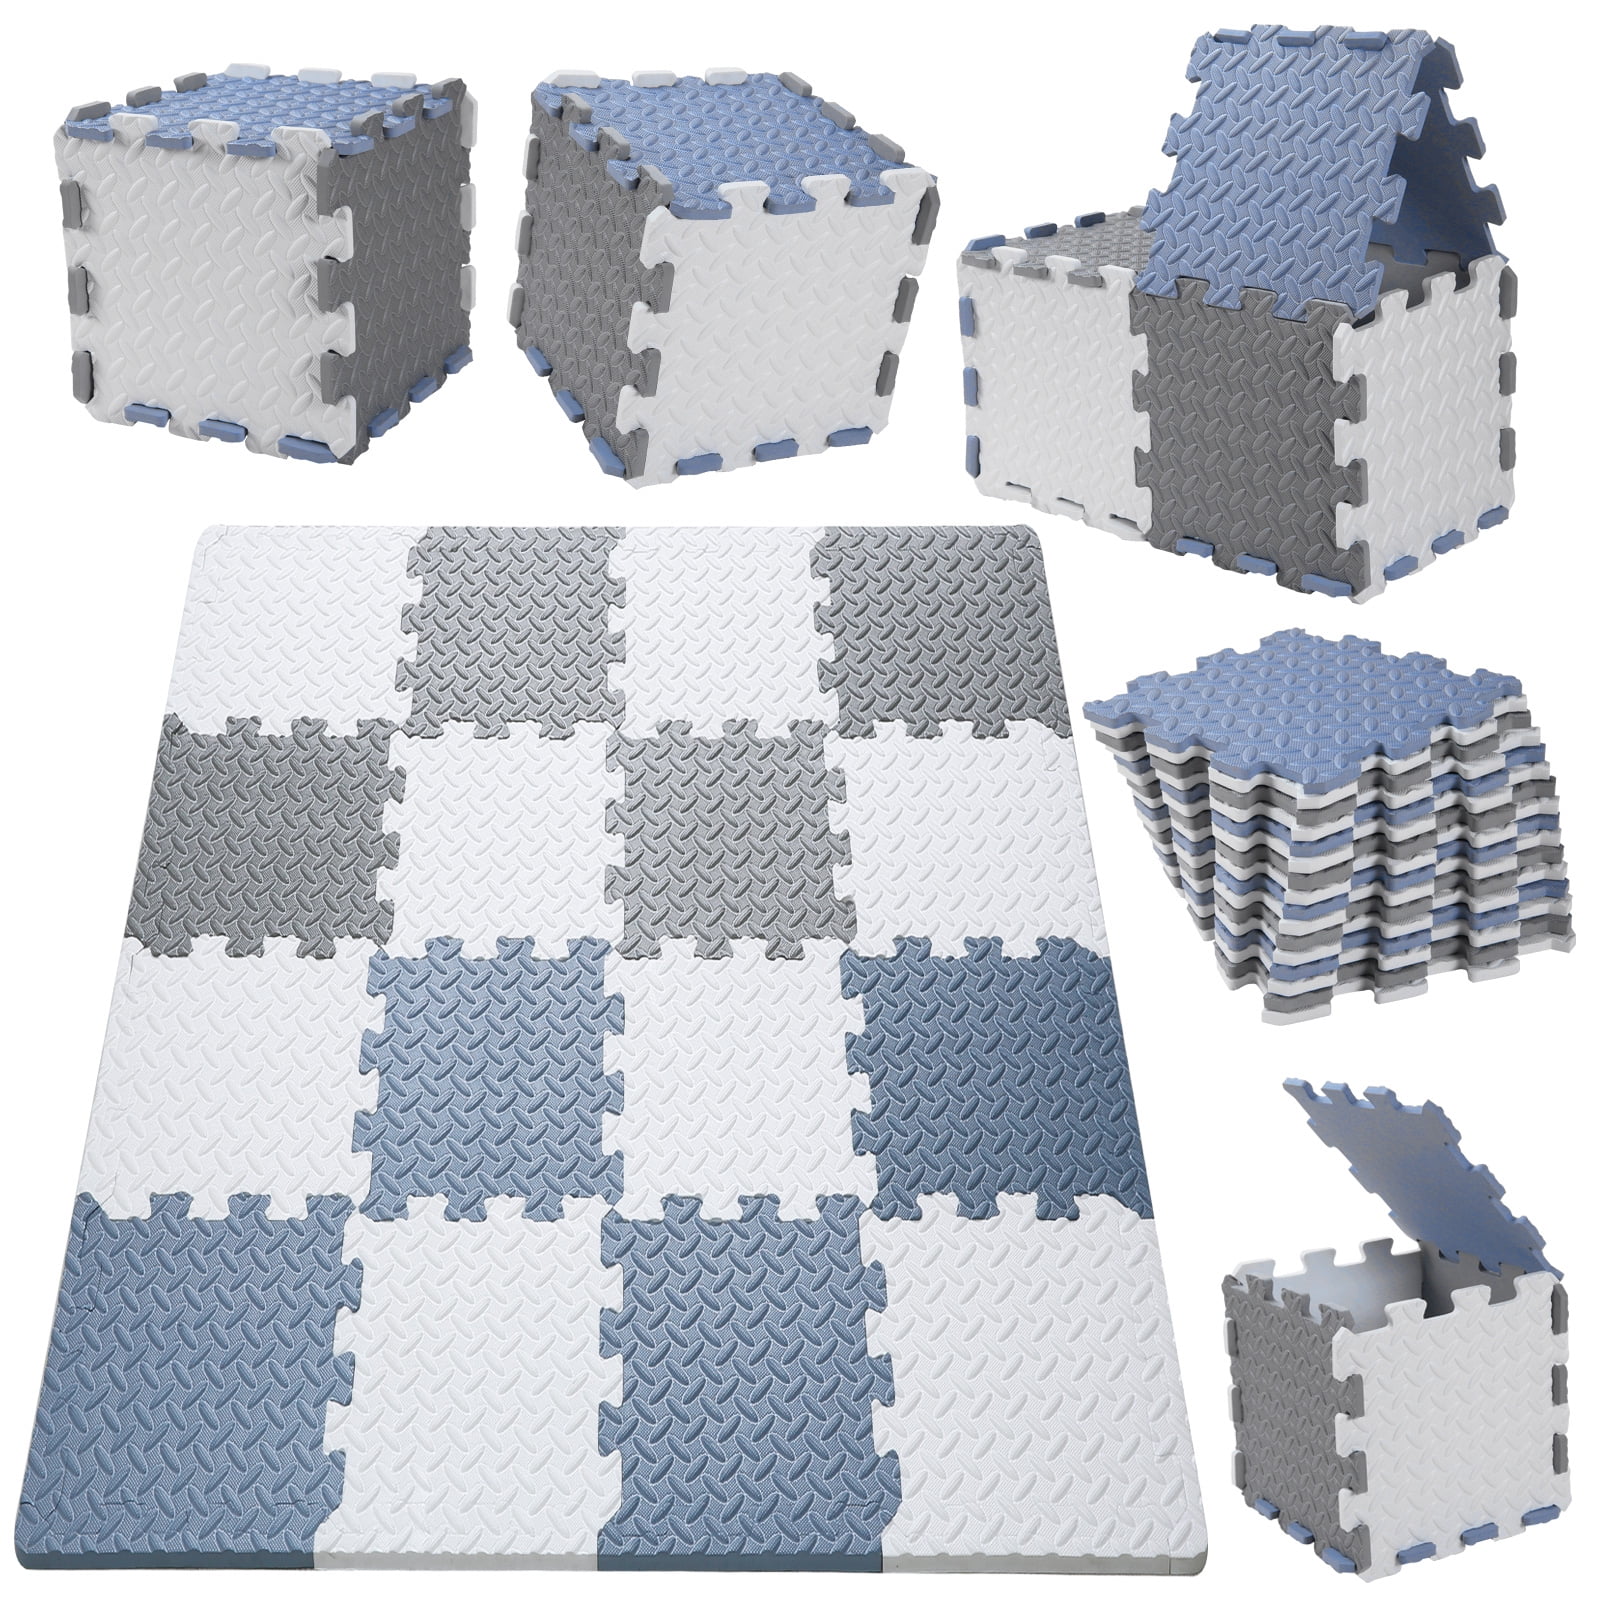 White/Gray/Blue 0.47 Inch Thickened Interlocking Foam Puzzle Tile Exercise Mats Floor Mats Foam Play Mats Jigsaw Mat Baby Child Rug Crawl Mat with Storage Bag Tamiplay 16Pcs Foam Baby Play Mat 